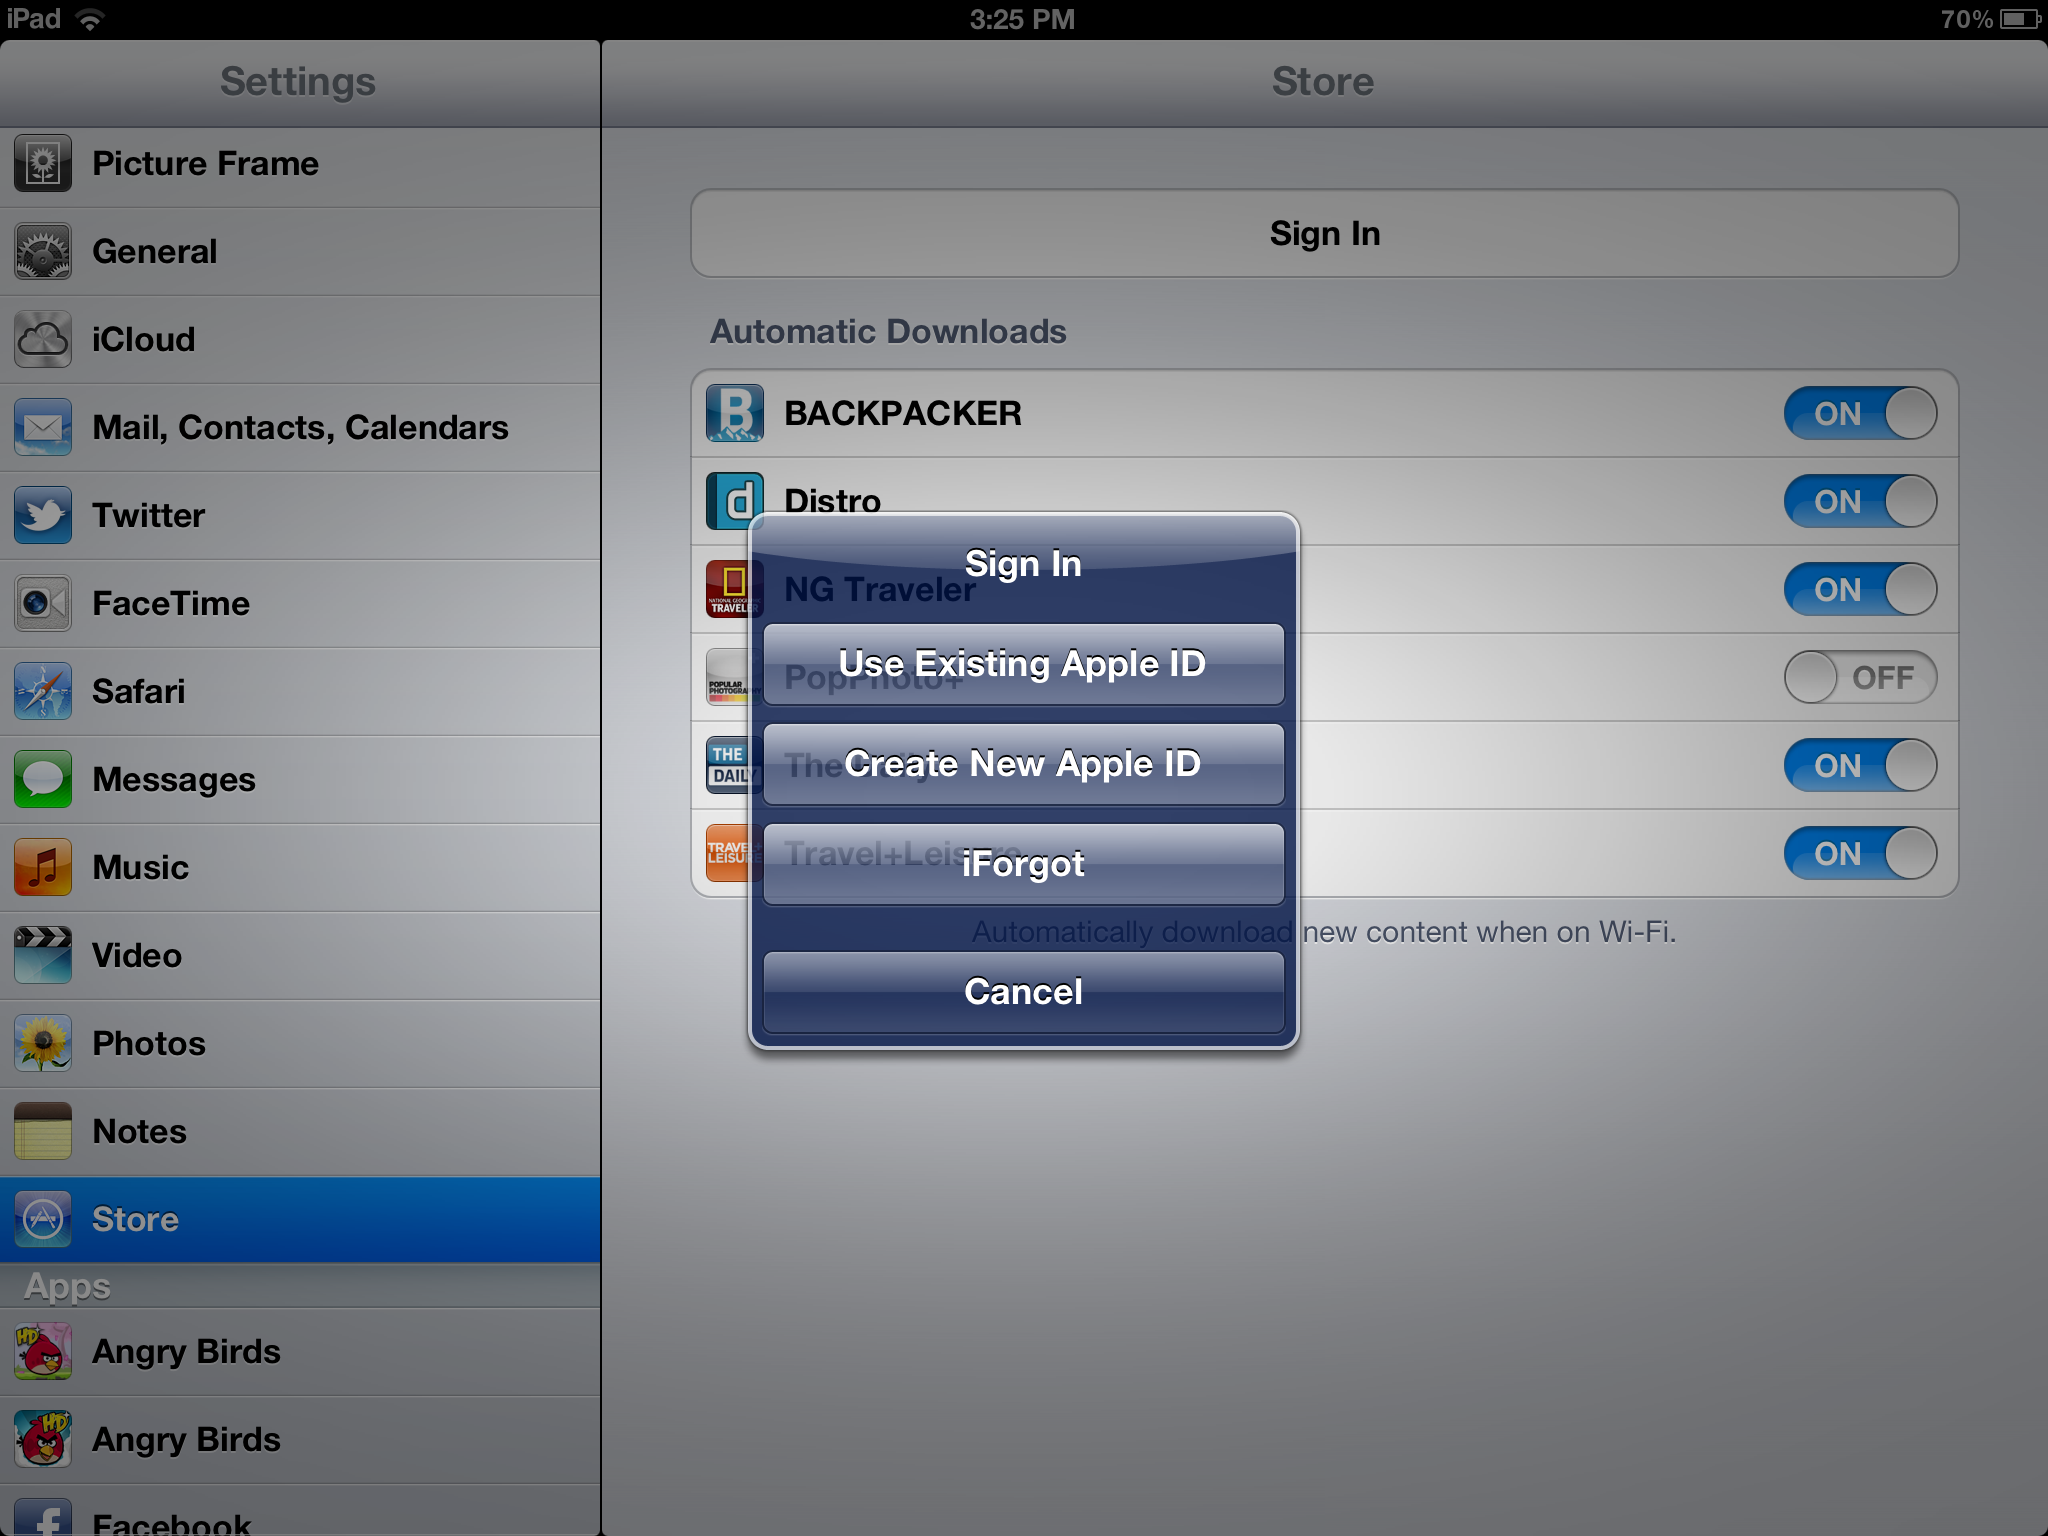 How to use existing ID to sign into App Store on iPhone iPad iPod touch